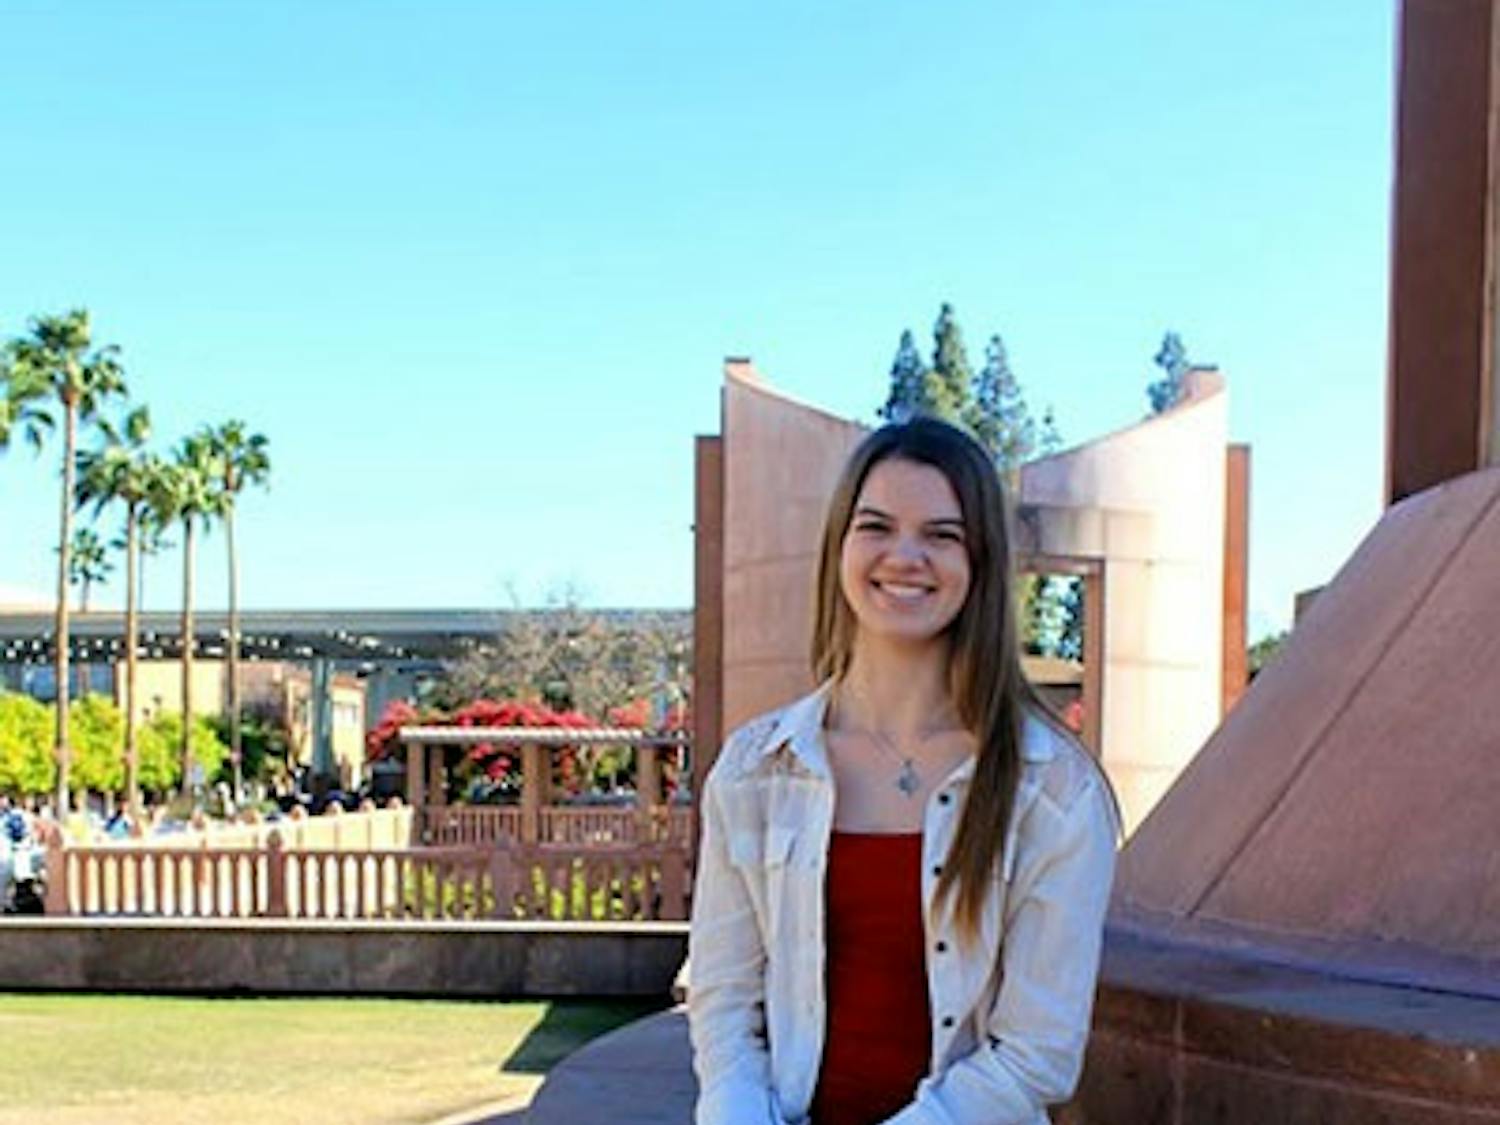 Justice studies freshman Erin Schulte will be a fellow with the Center for the Study of Religion and Conflict here at ASU for 2014 and 2015. Schulte will participate in a special class with the center’s director and work with faculty members on research projects. (Photo by Micaela Rodriguez)